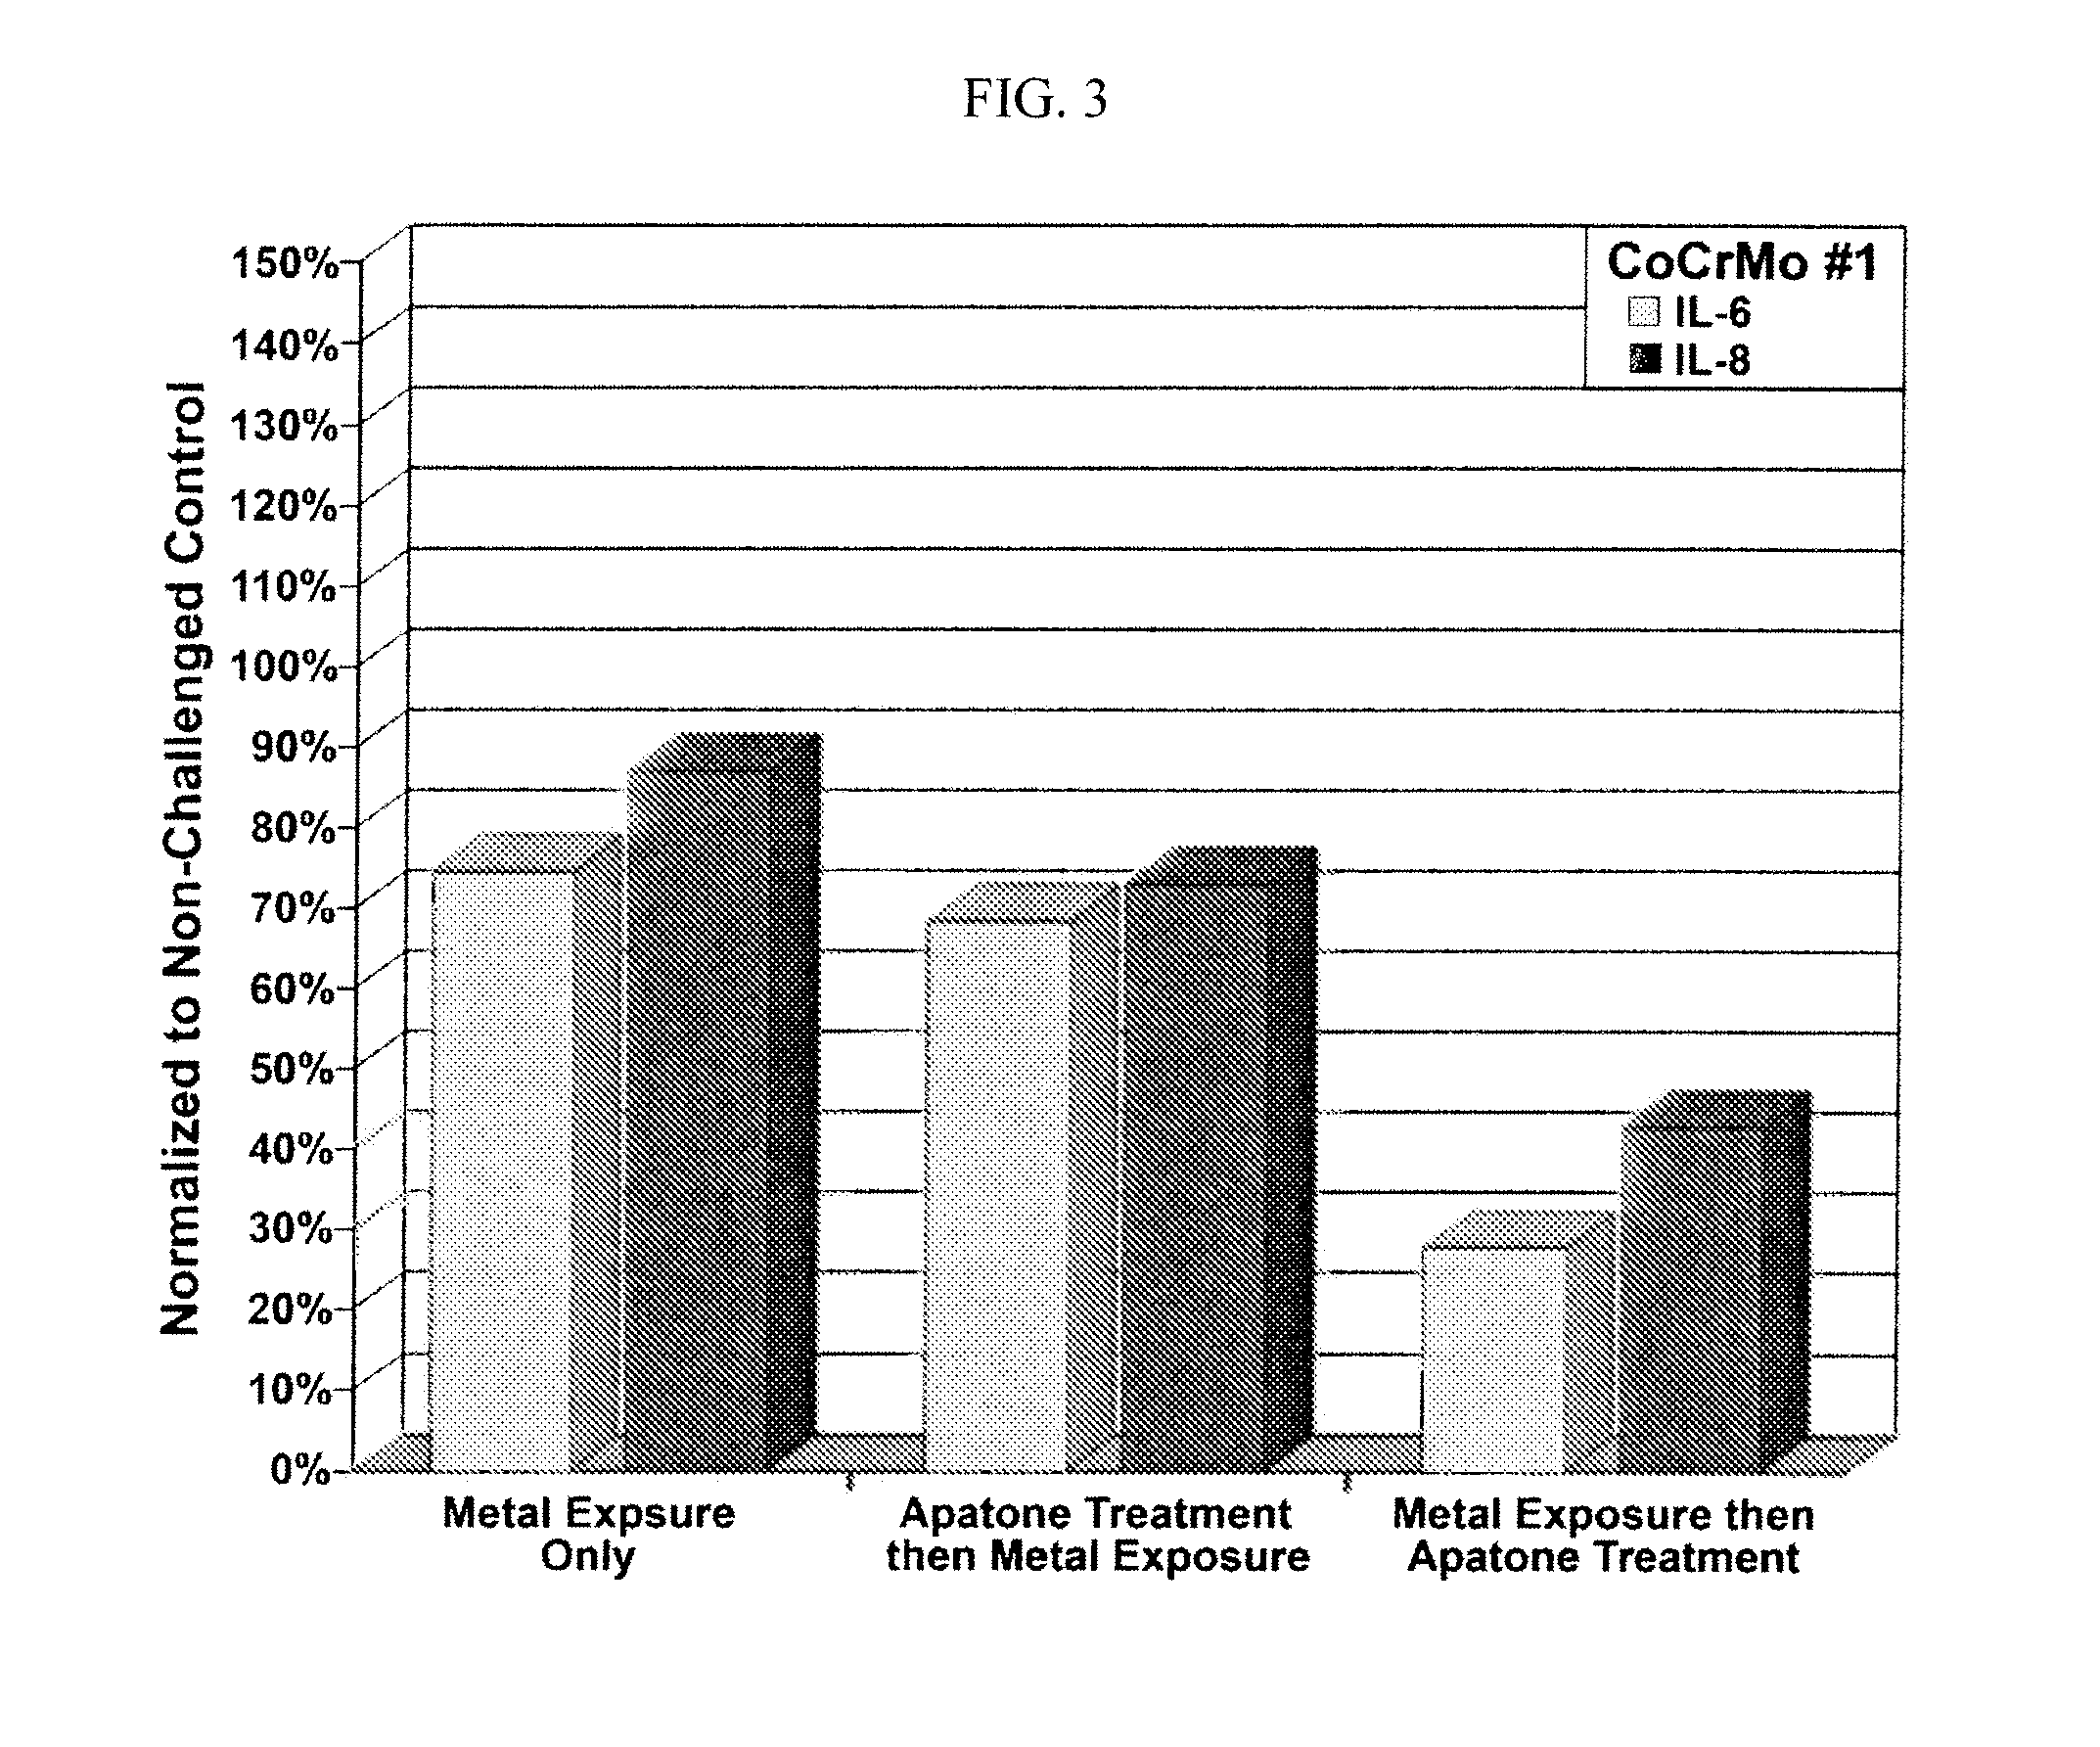 Vitamin C and vitamin K, and compositions thereof for treatment of osteolysis or prolongation of prosthetic implant